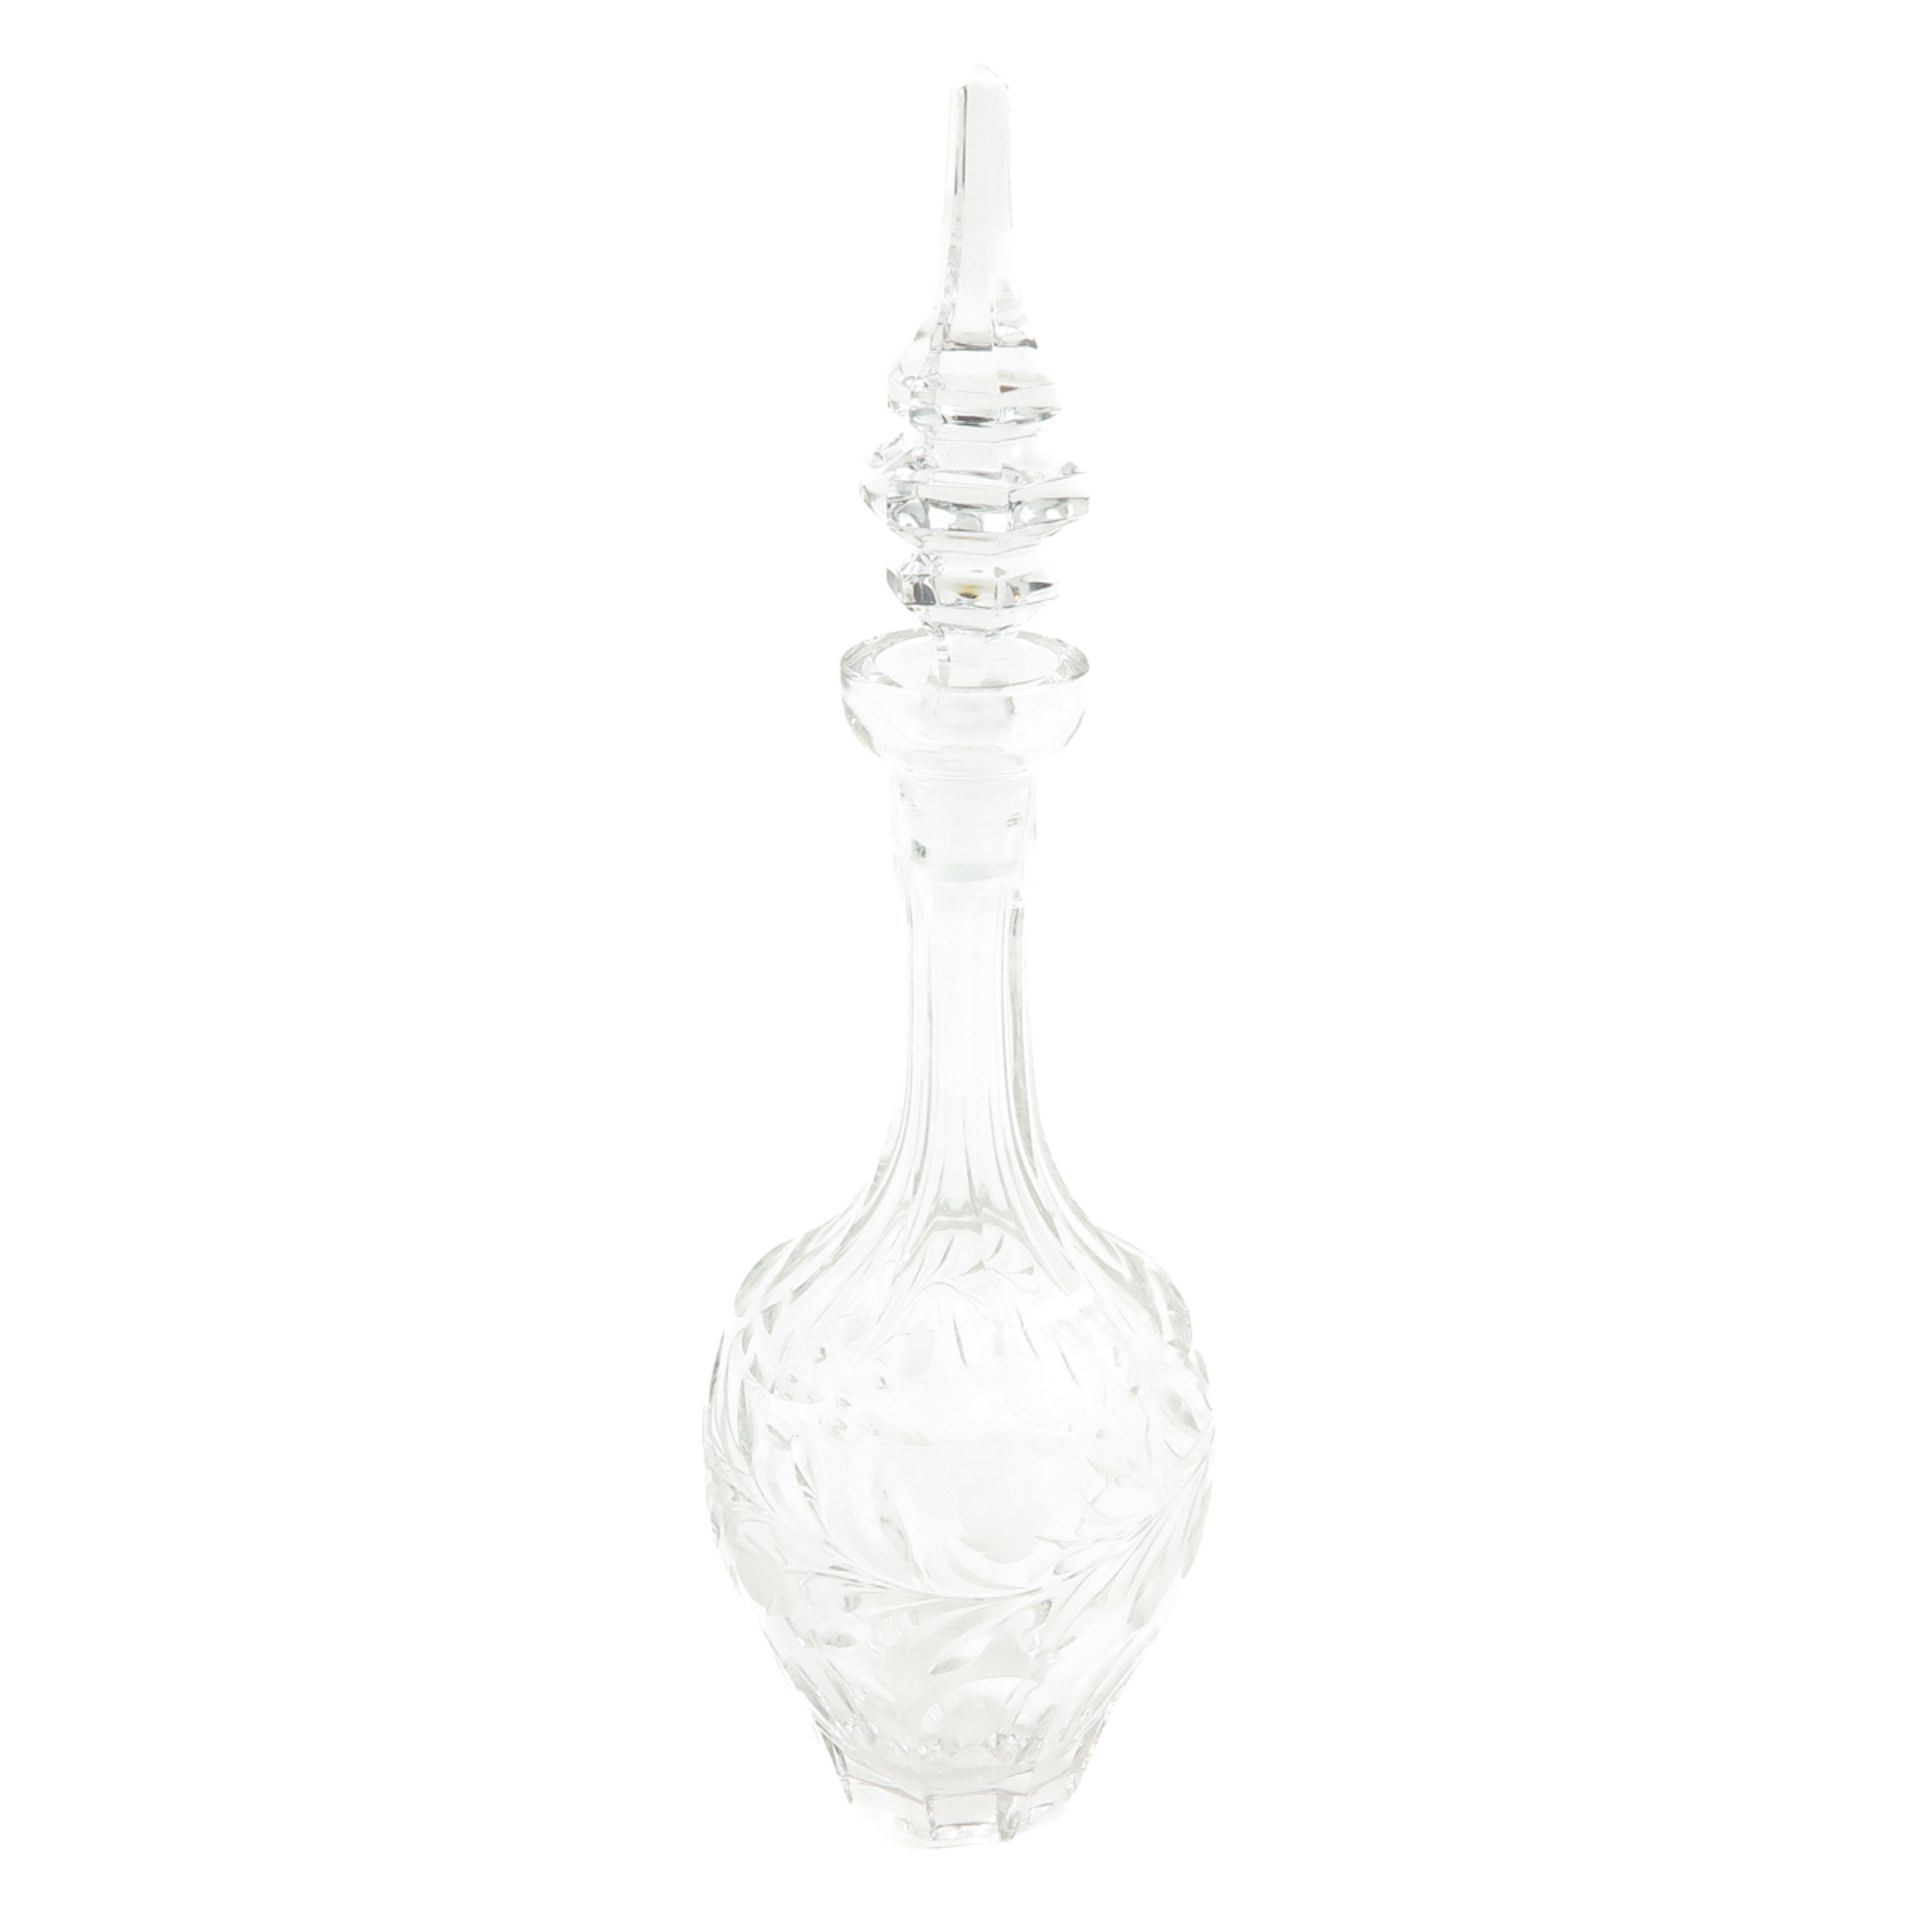 A Collection of Decanters - Image 9 of 10